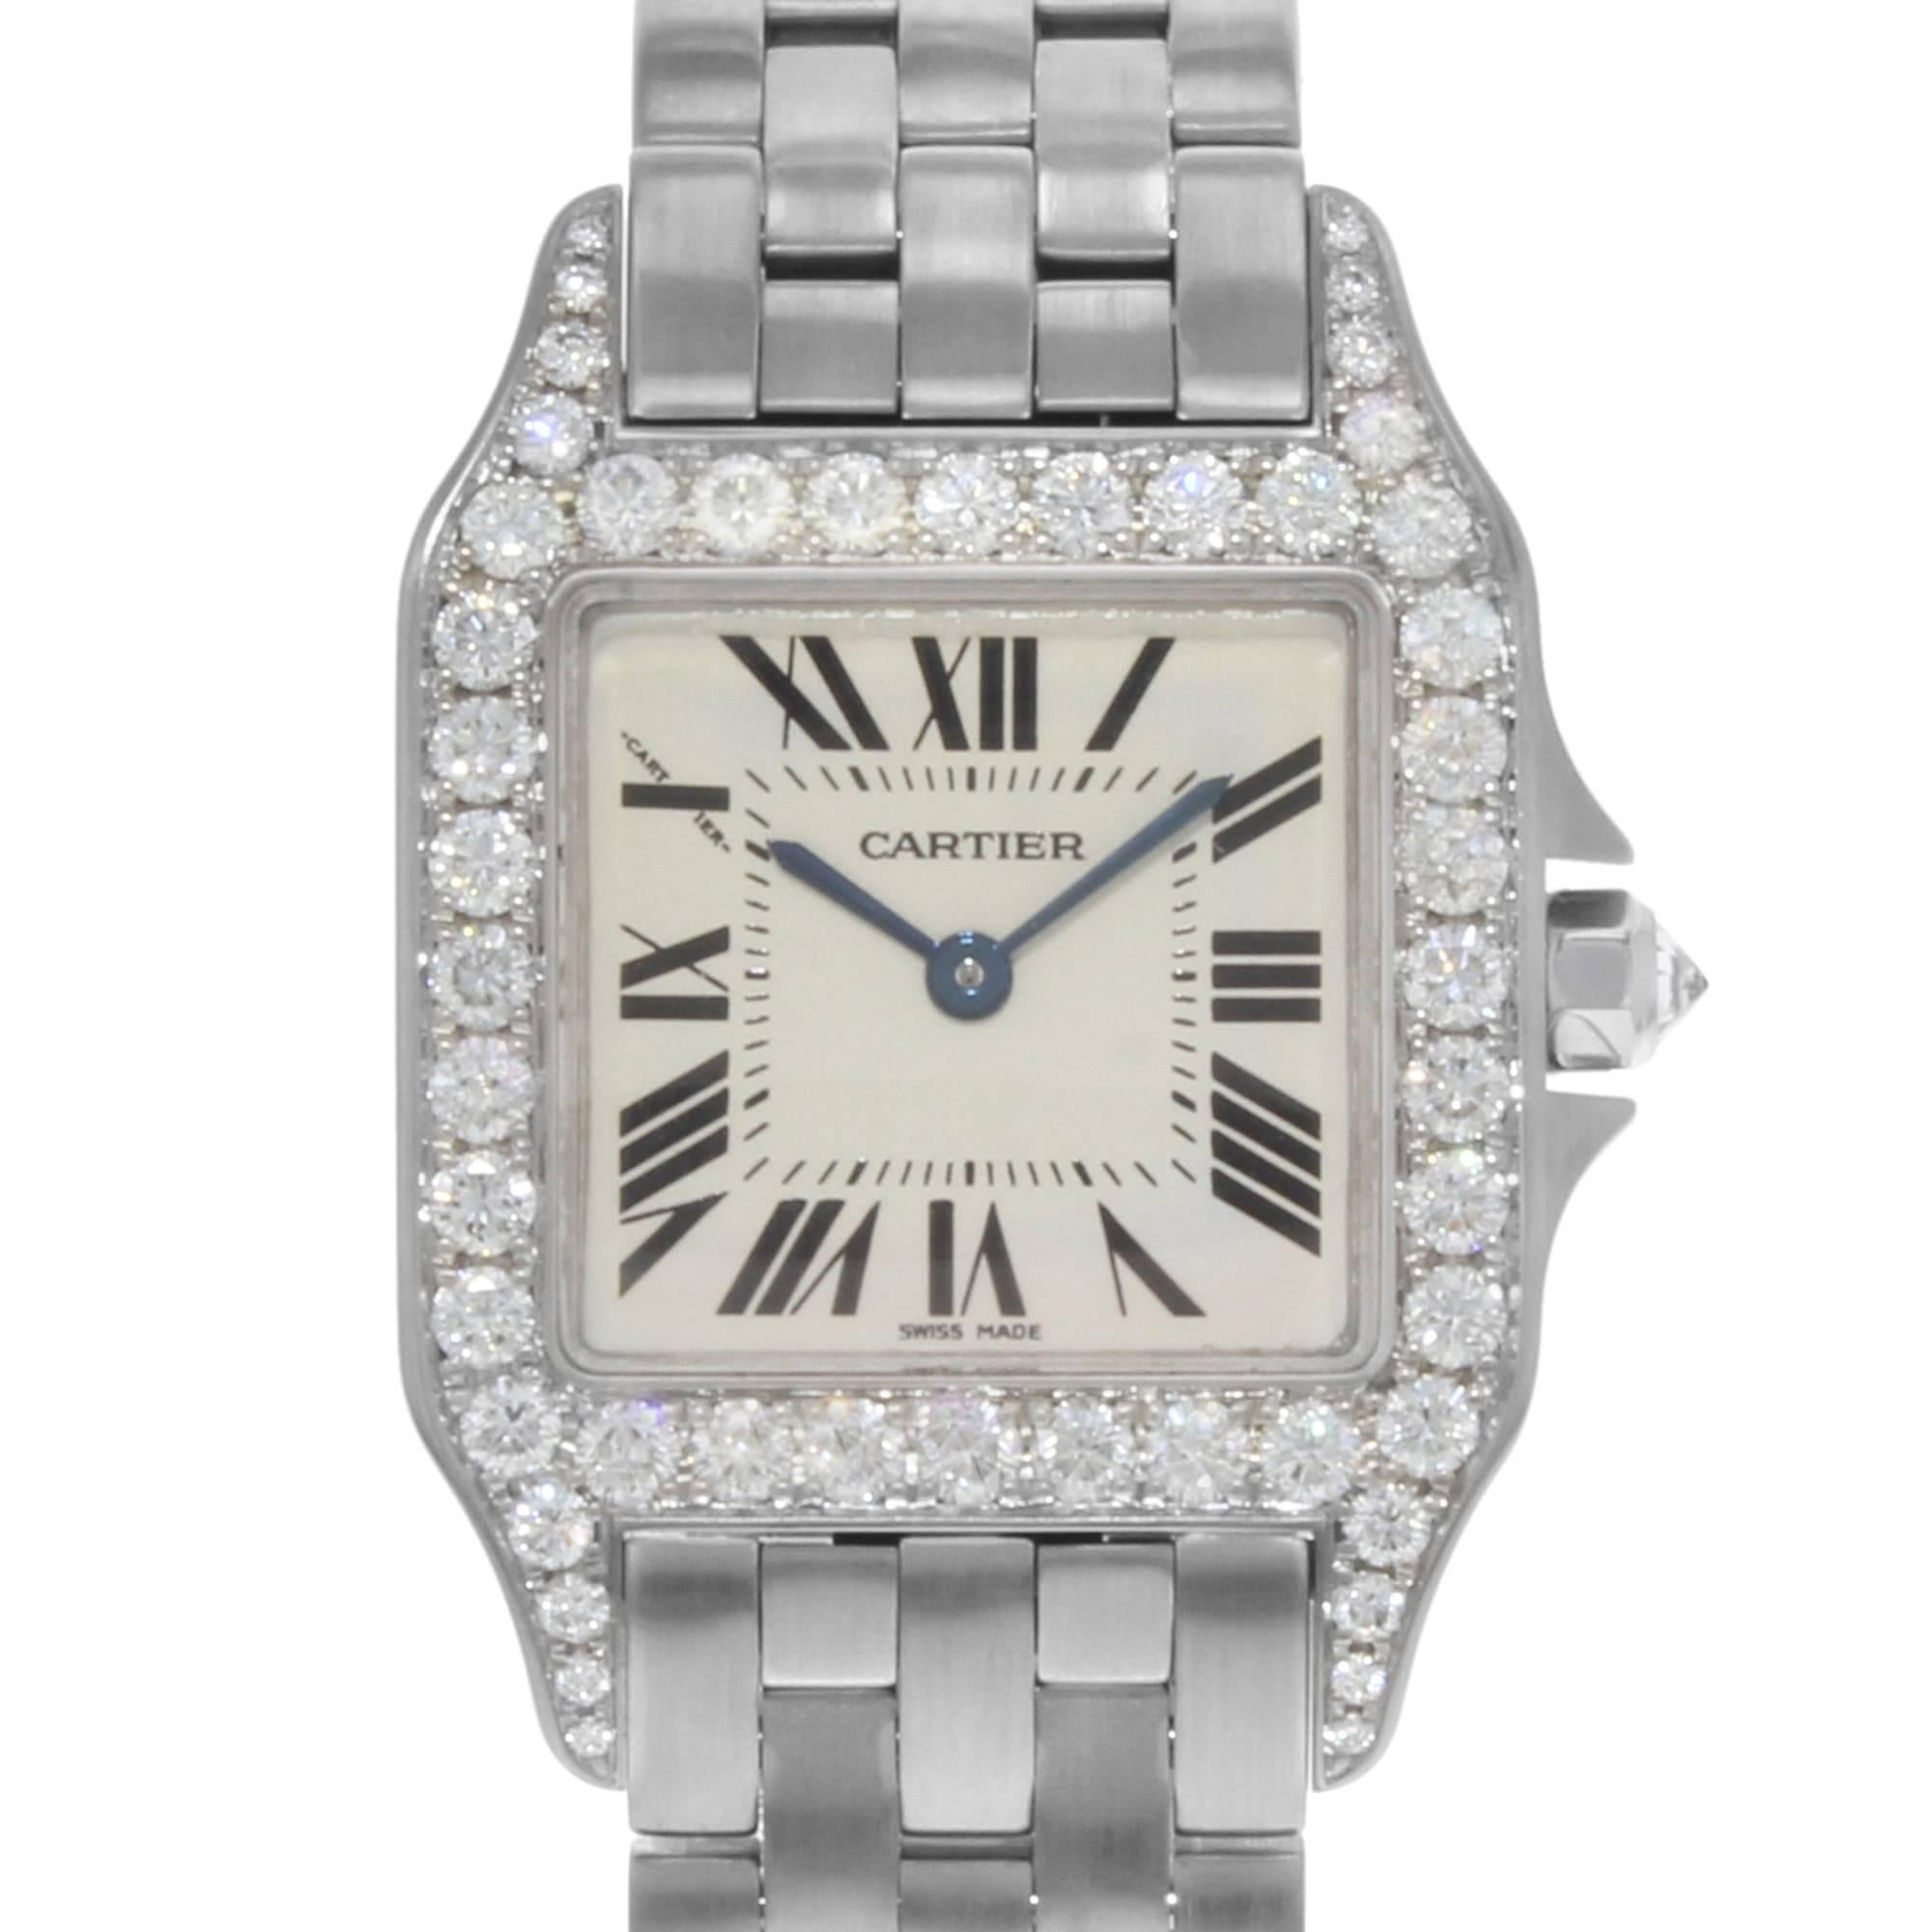 This pre-owned Cartier Santos WF9004Y8 is a beautiful Ladies timepiece that is powered by a quartz movement which is cased in a white gold case. It has a square shape face, no features dial and has hand roman numerals style markers. It is completed